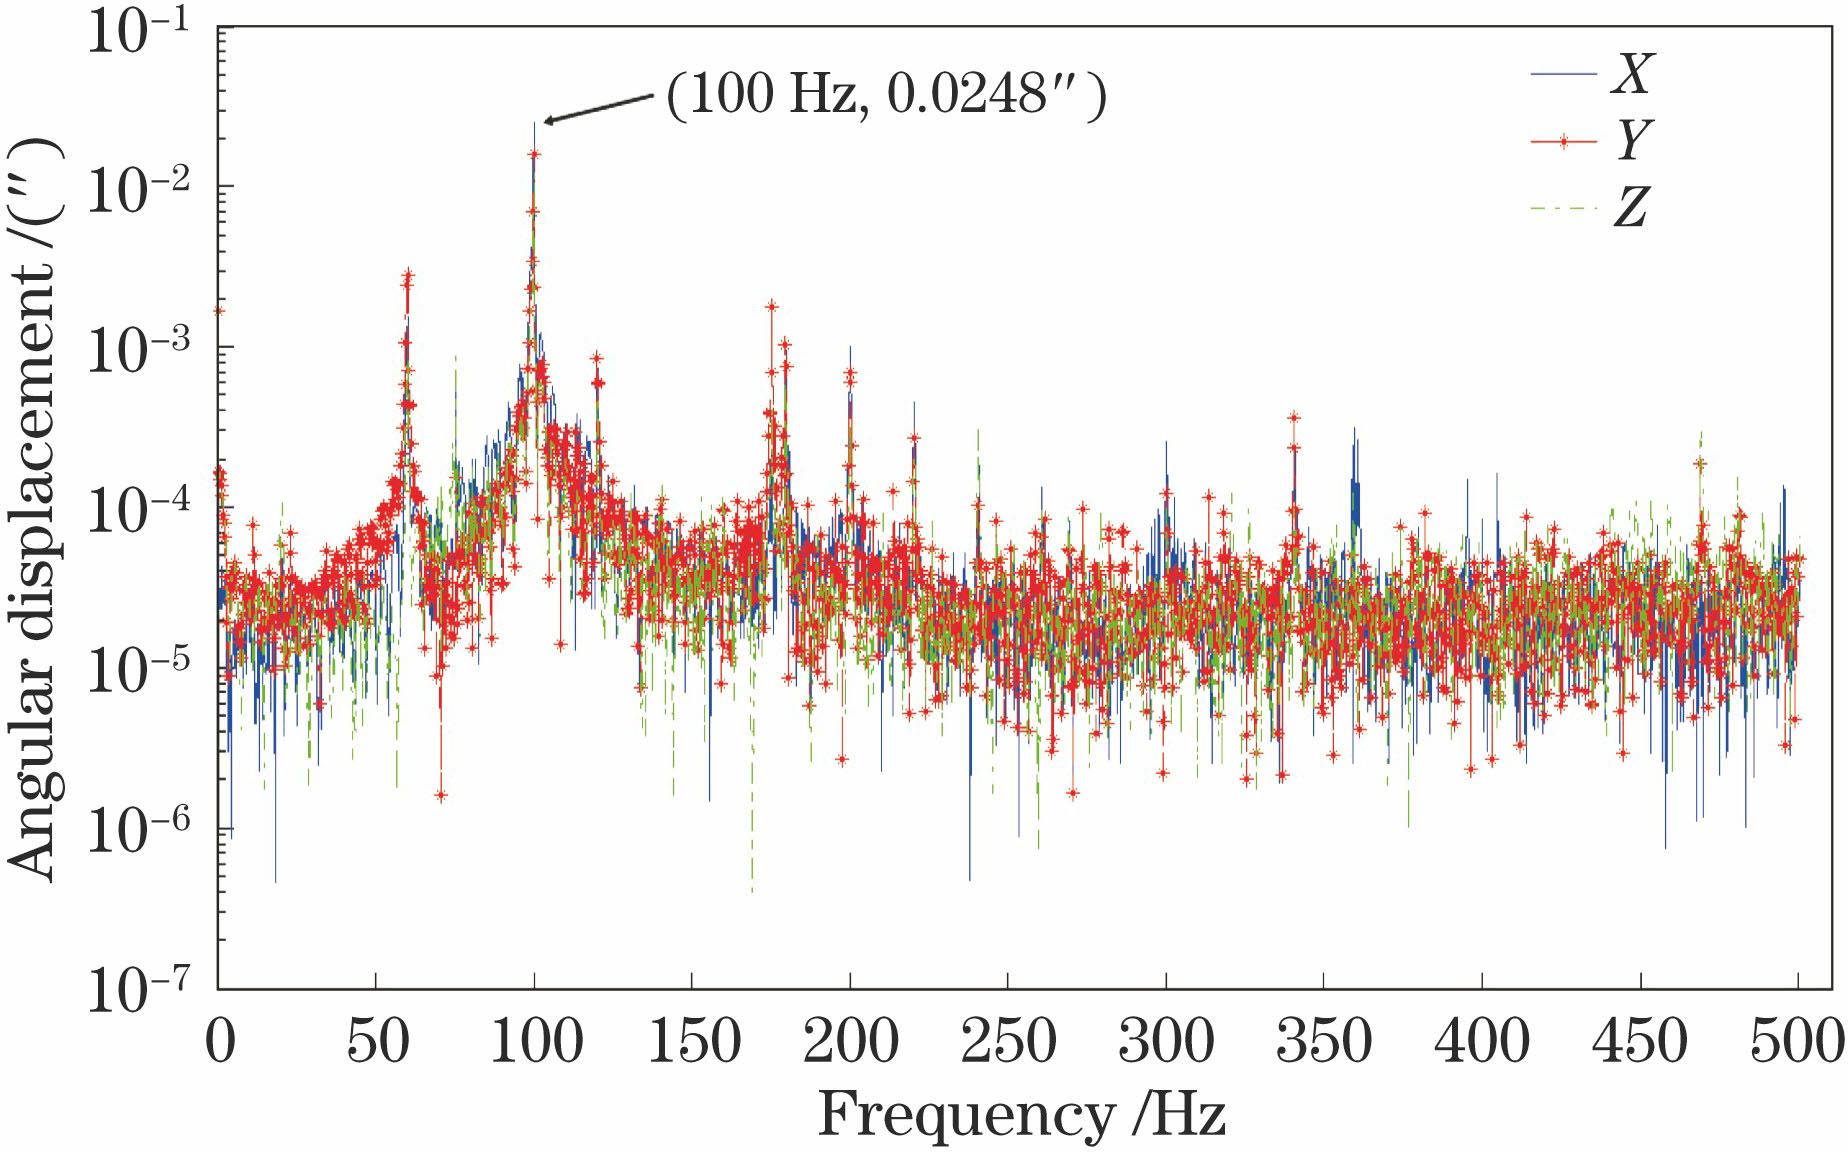 Frequency-domain analysis of measured angular displacement under load condition 1